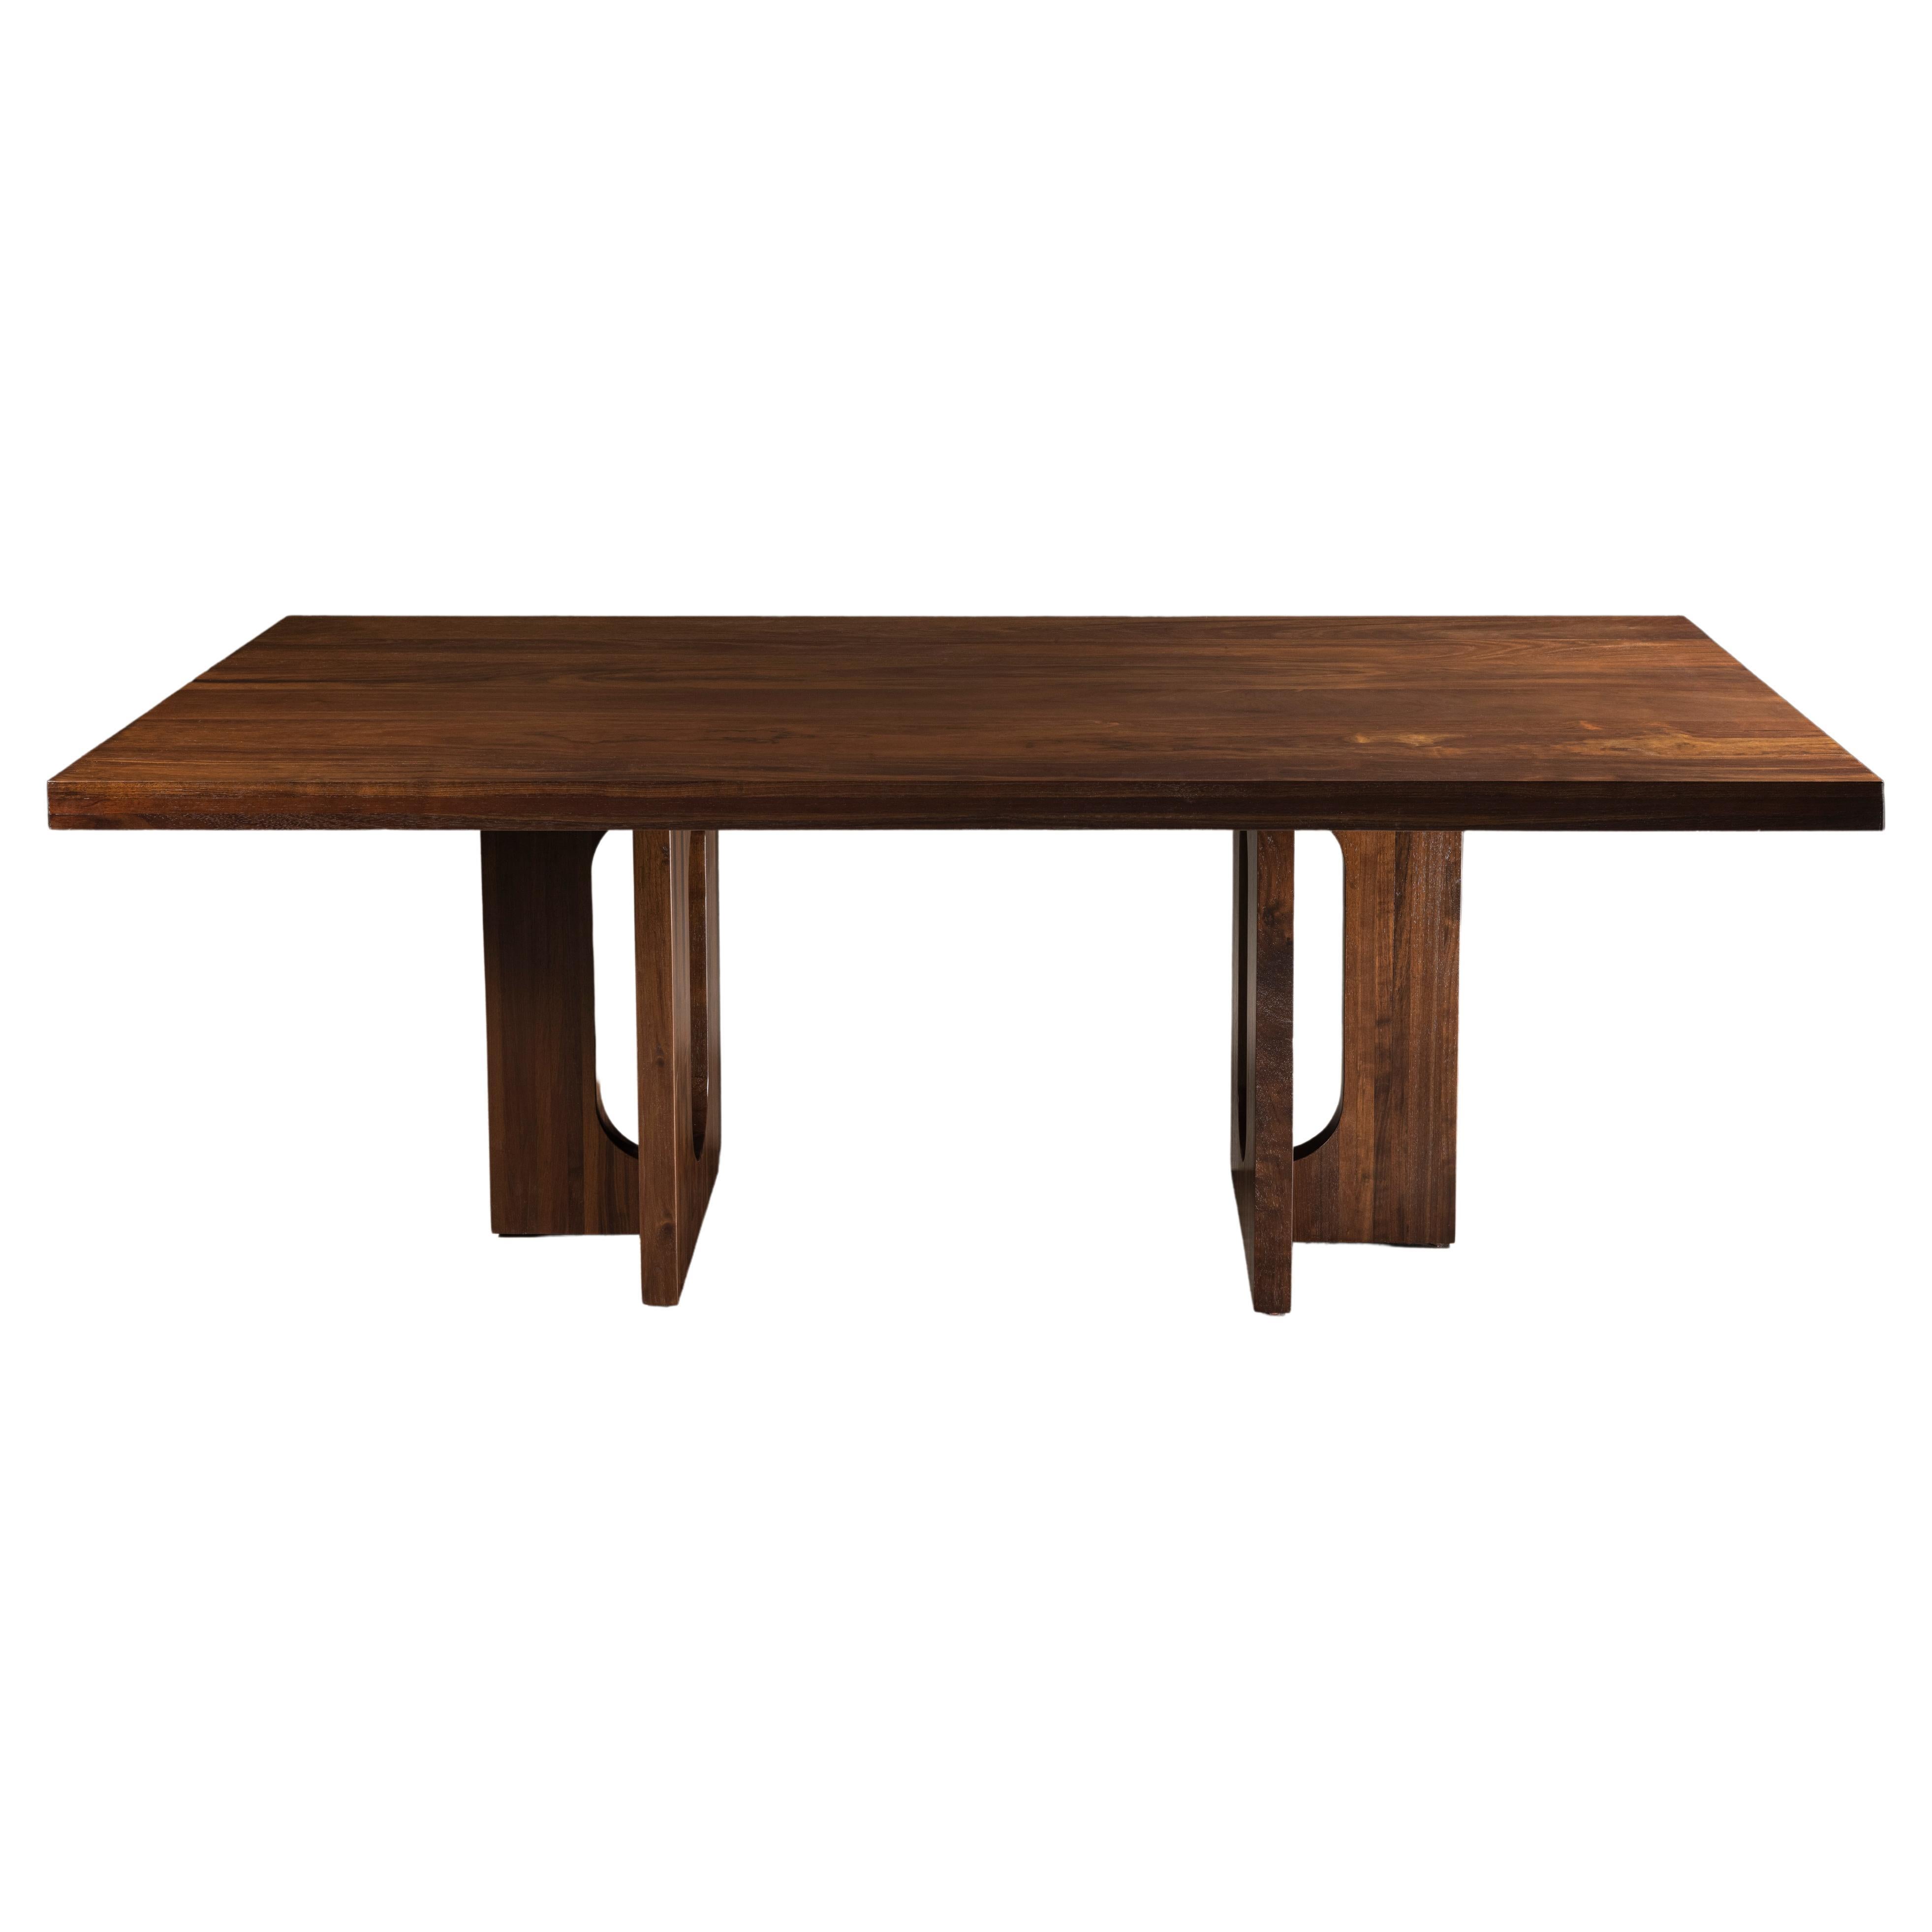 Mr. O Solid Walnut Finish Dining Table For Sale